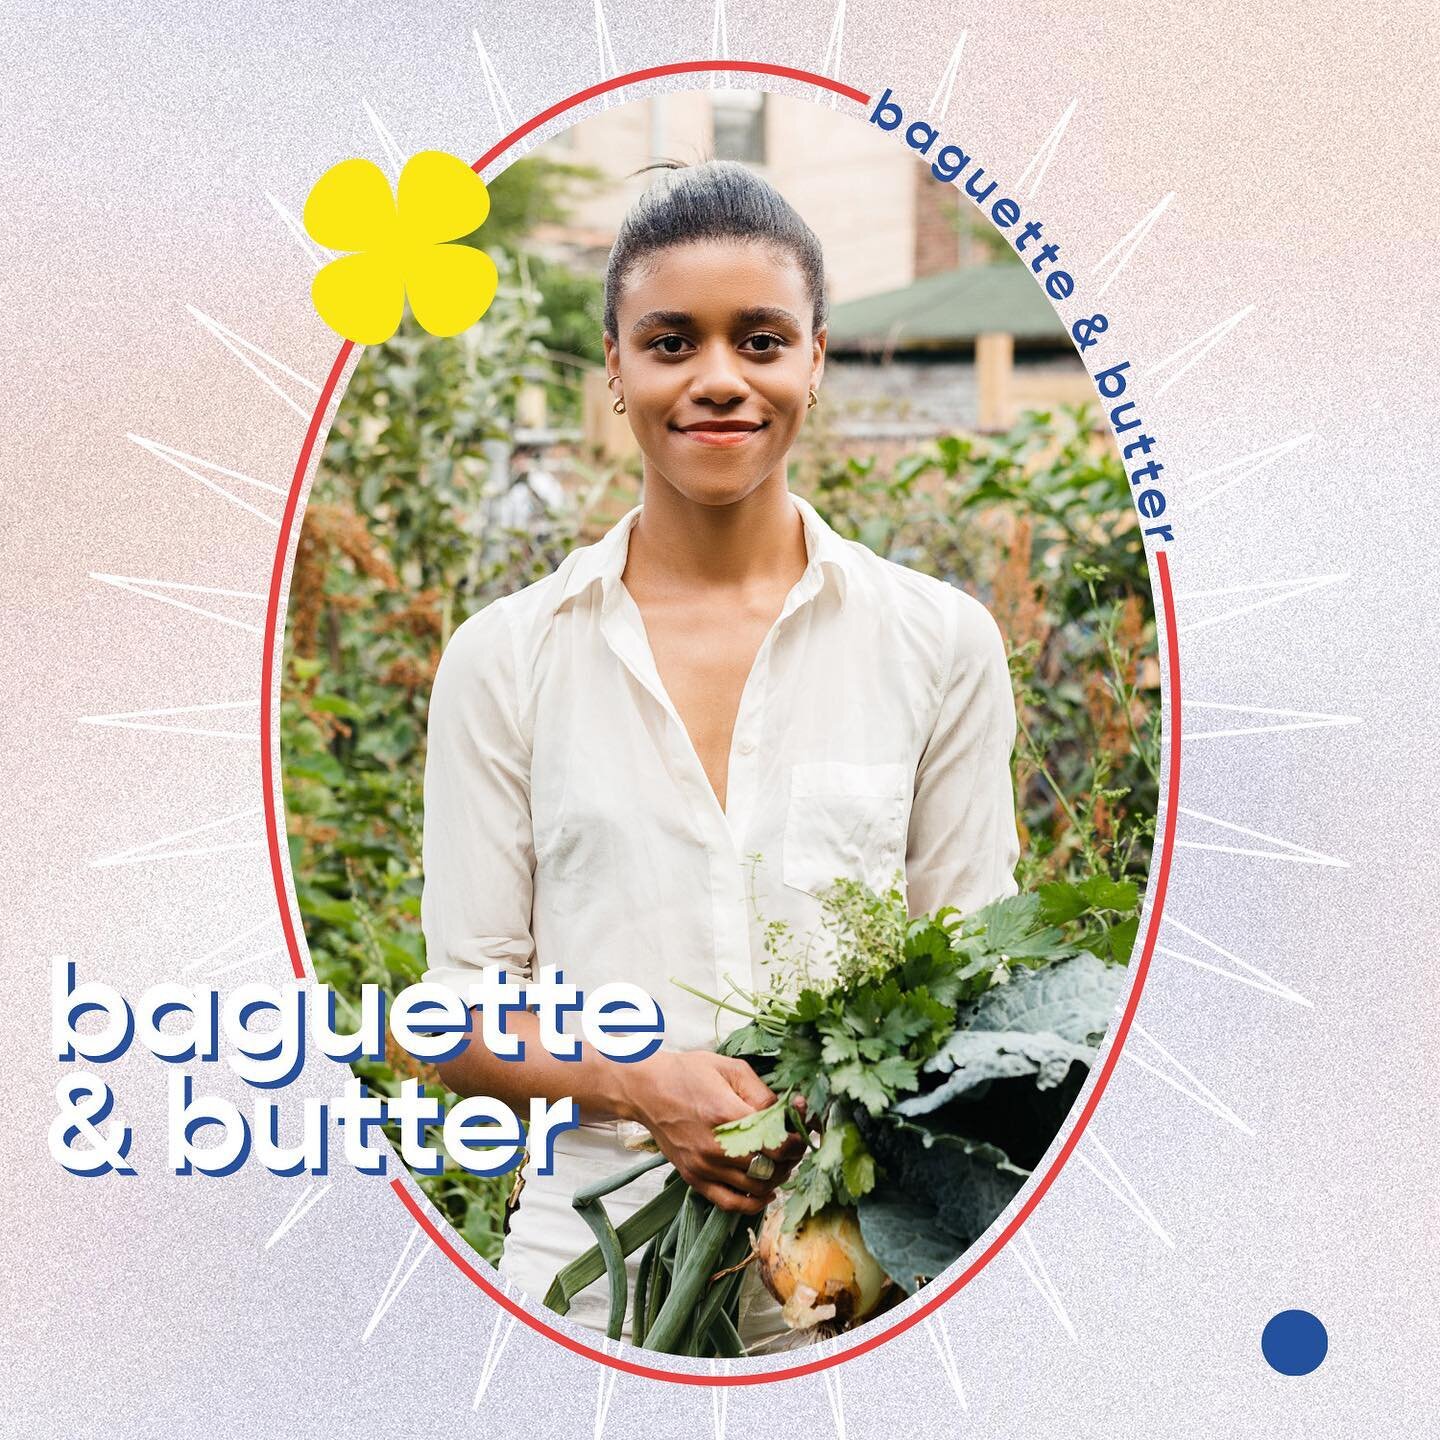 First up in our local cookbook series is The City Dweller&rsquo;s Guide to Sustainable Cooking by Amanda McLemore, founder of @baguette_and_butter . What originally began as a space to document her journey into culinary school eventually turned into 